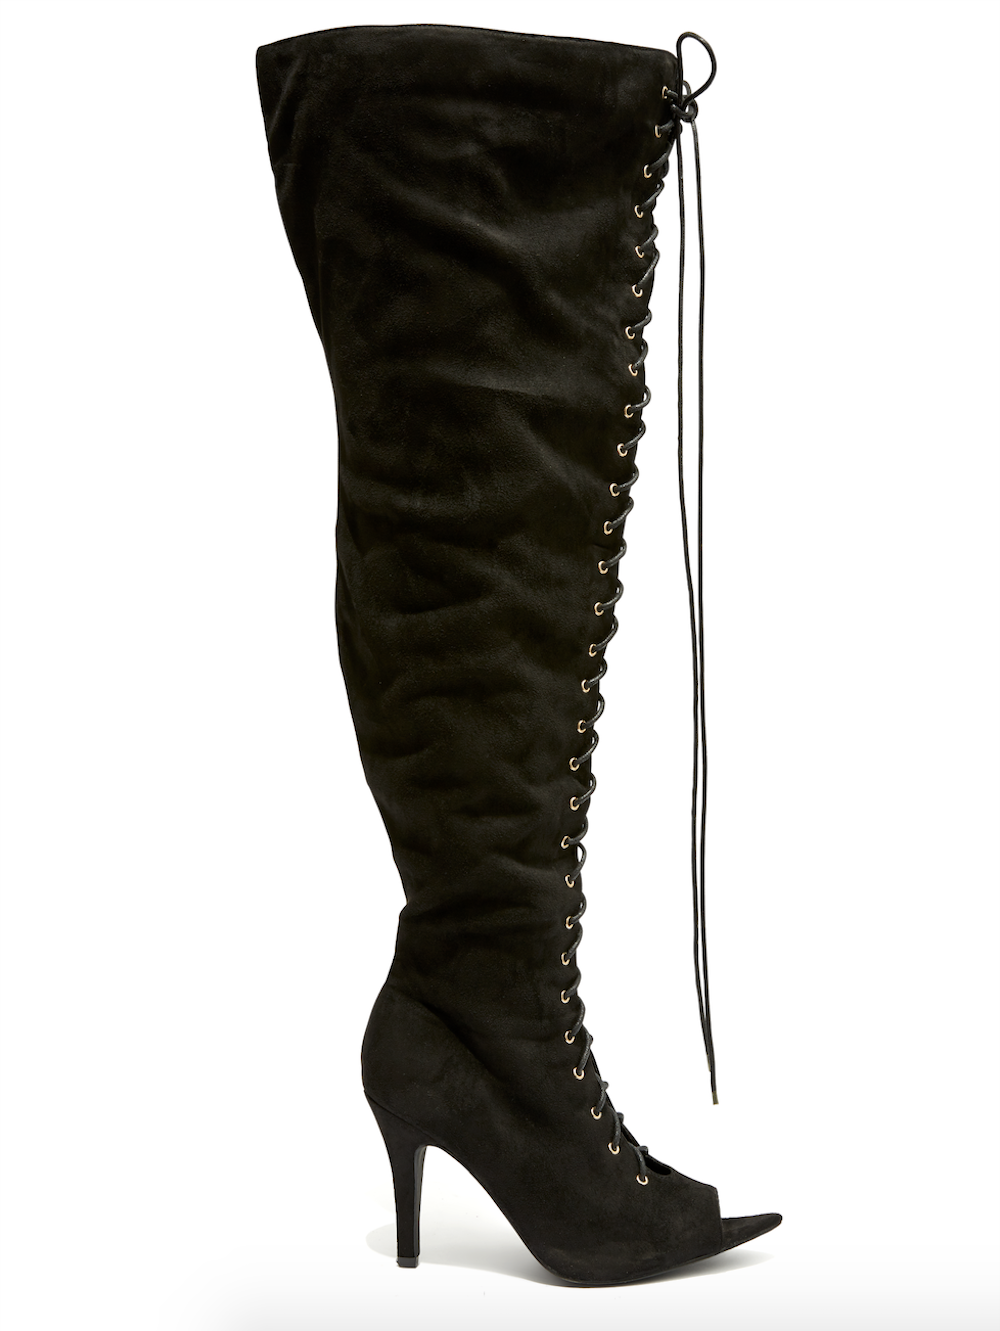 Thigh-High Boots For Plus Size Women